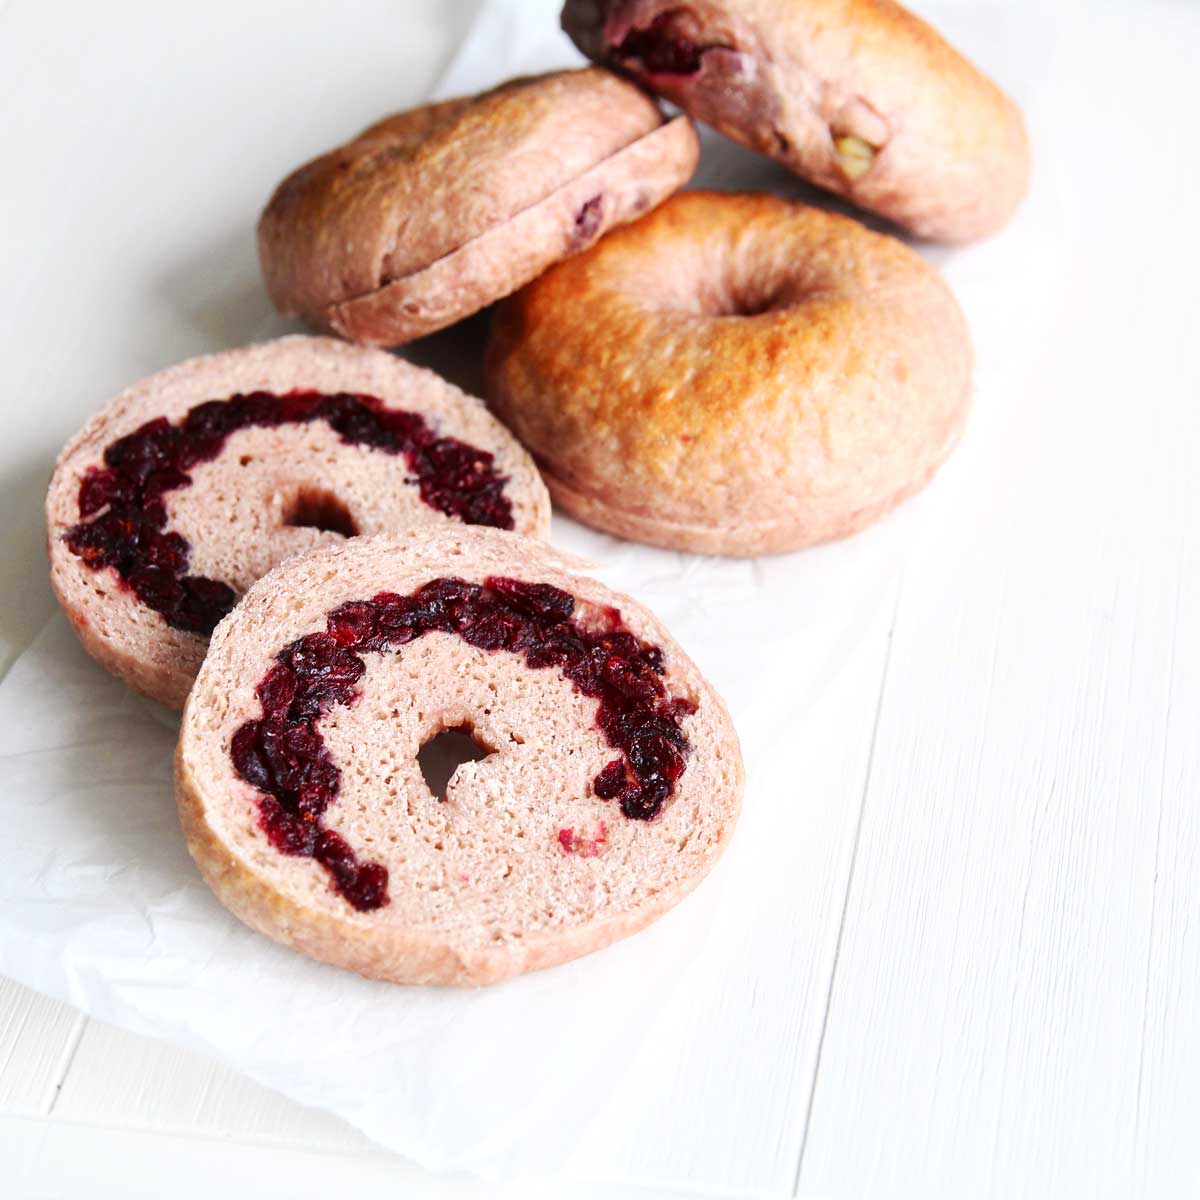 How To Make Stuffed Cranberry Bagels With Canned Cranberry Sauce - Nutella Stuffed Banana